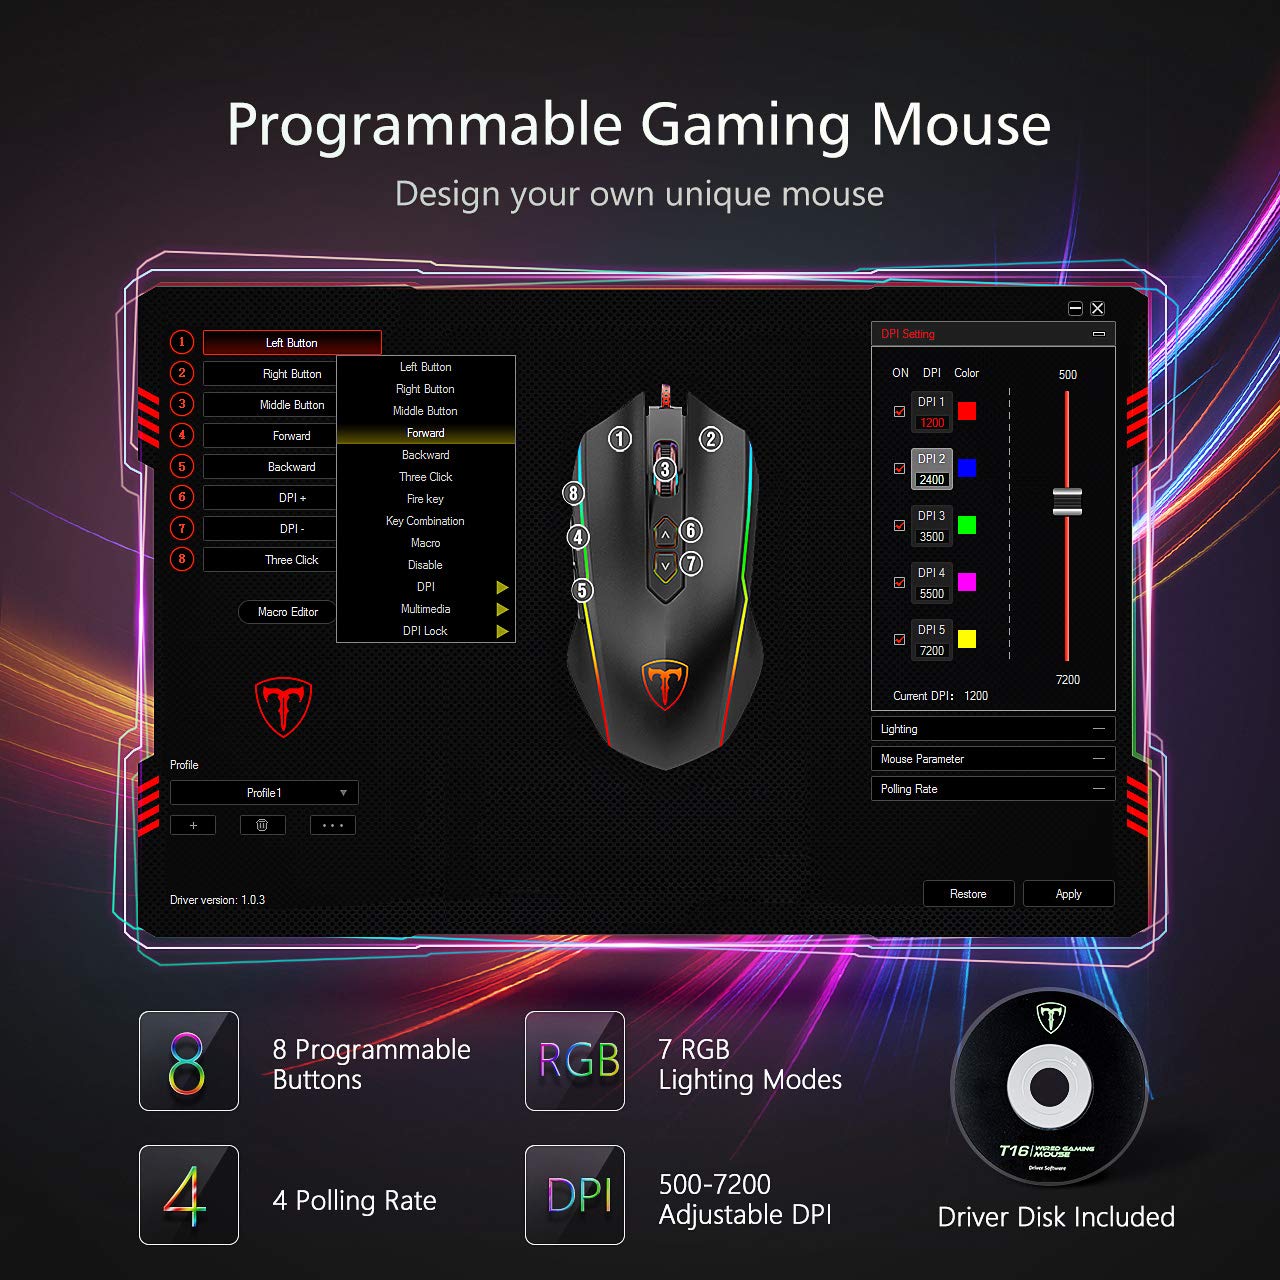 pictek gaming mouse wired 8 programmable buttons, chroma rgb backlit 7200 dpi